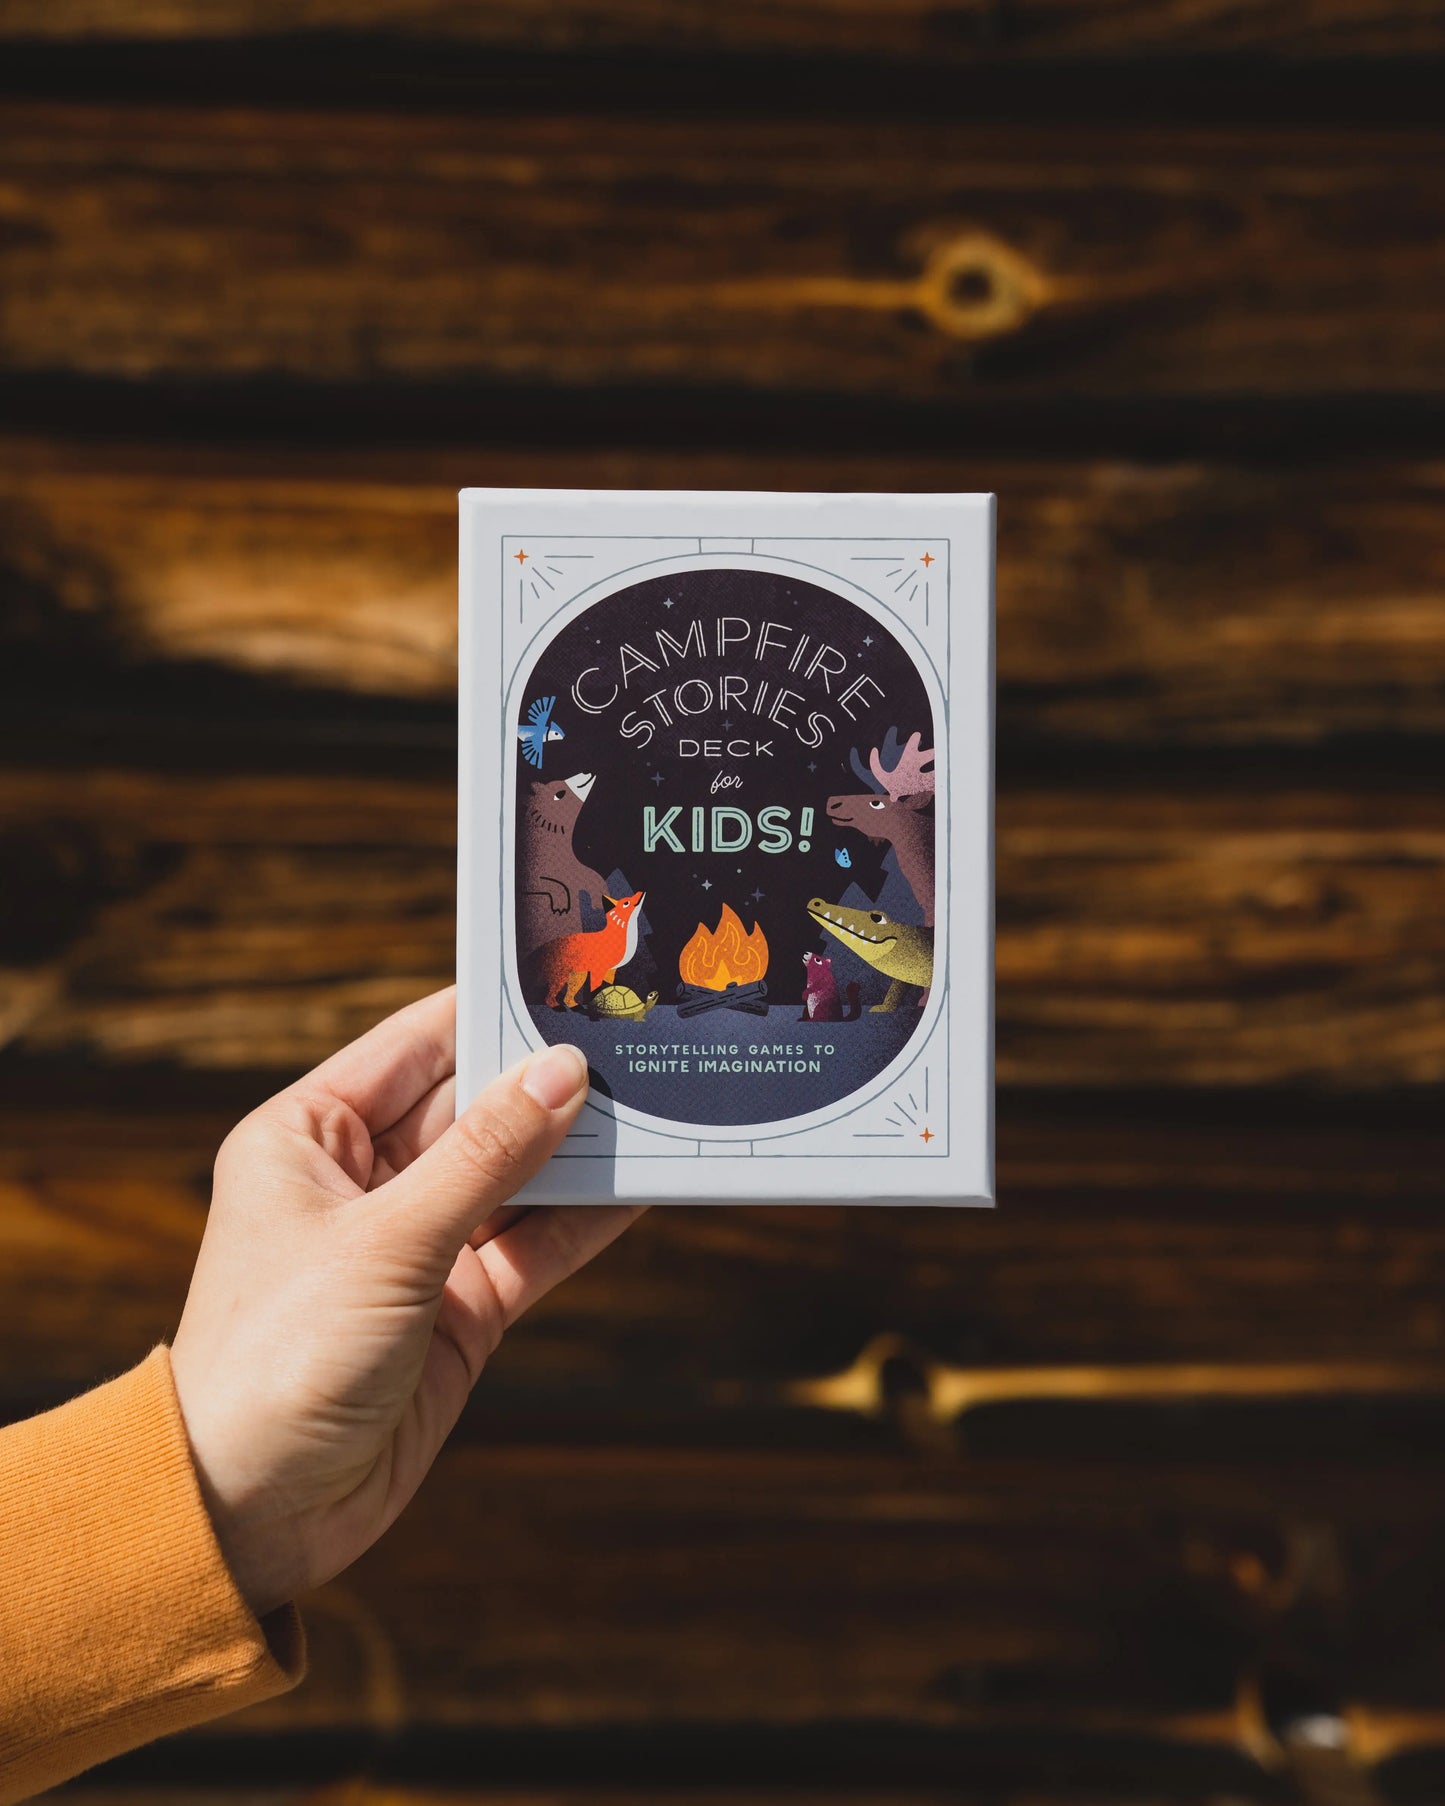 Campfire Storytelling Adventures For Kids